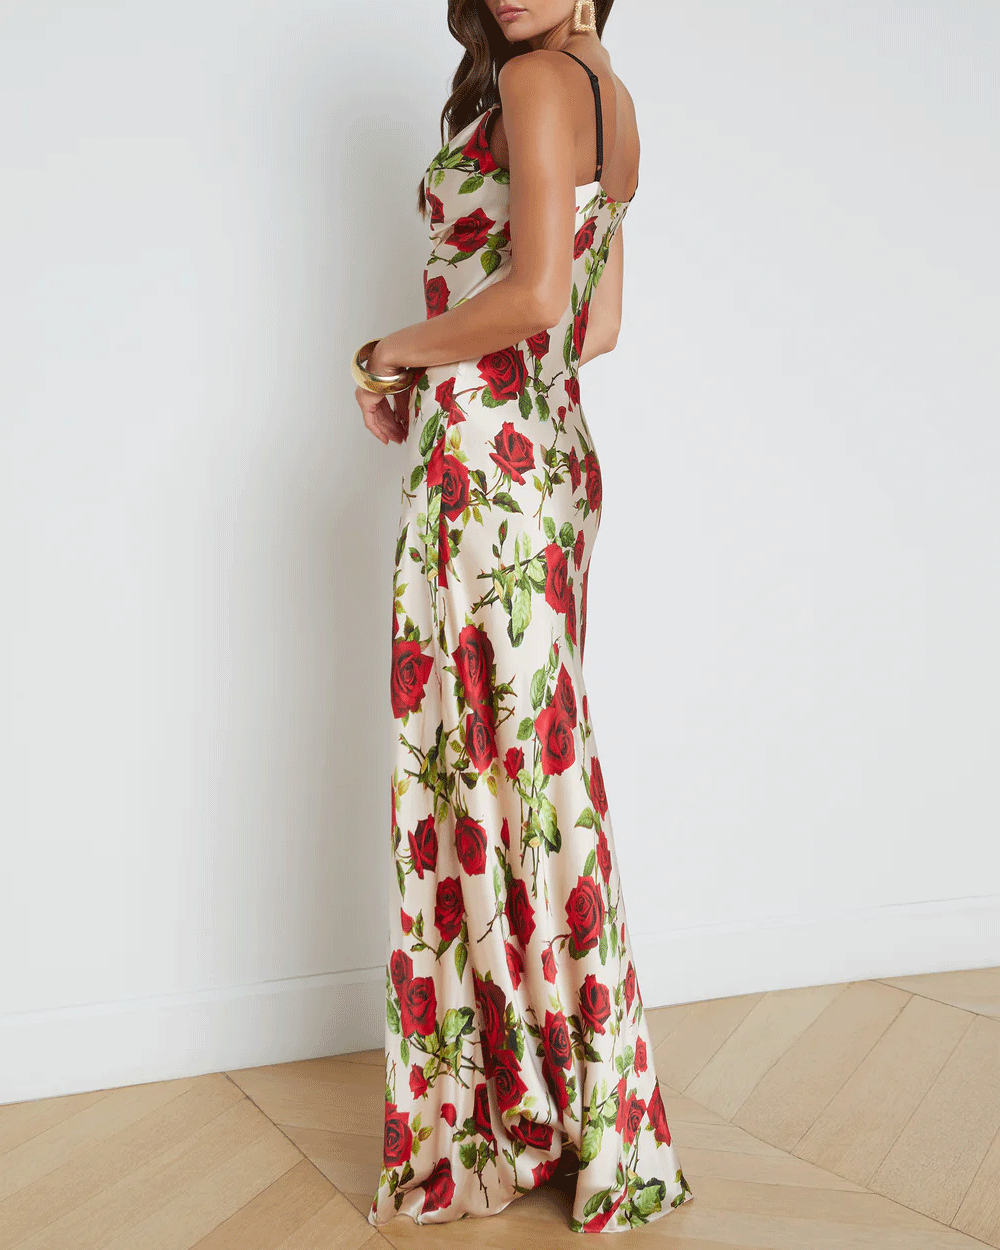 Sand and Red Rose Venice Cowl Lace Neck Gown